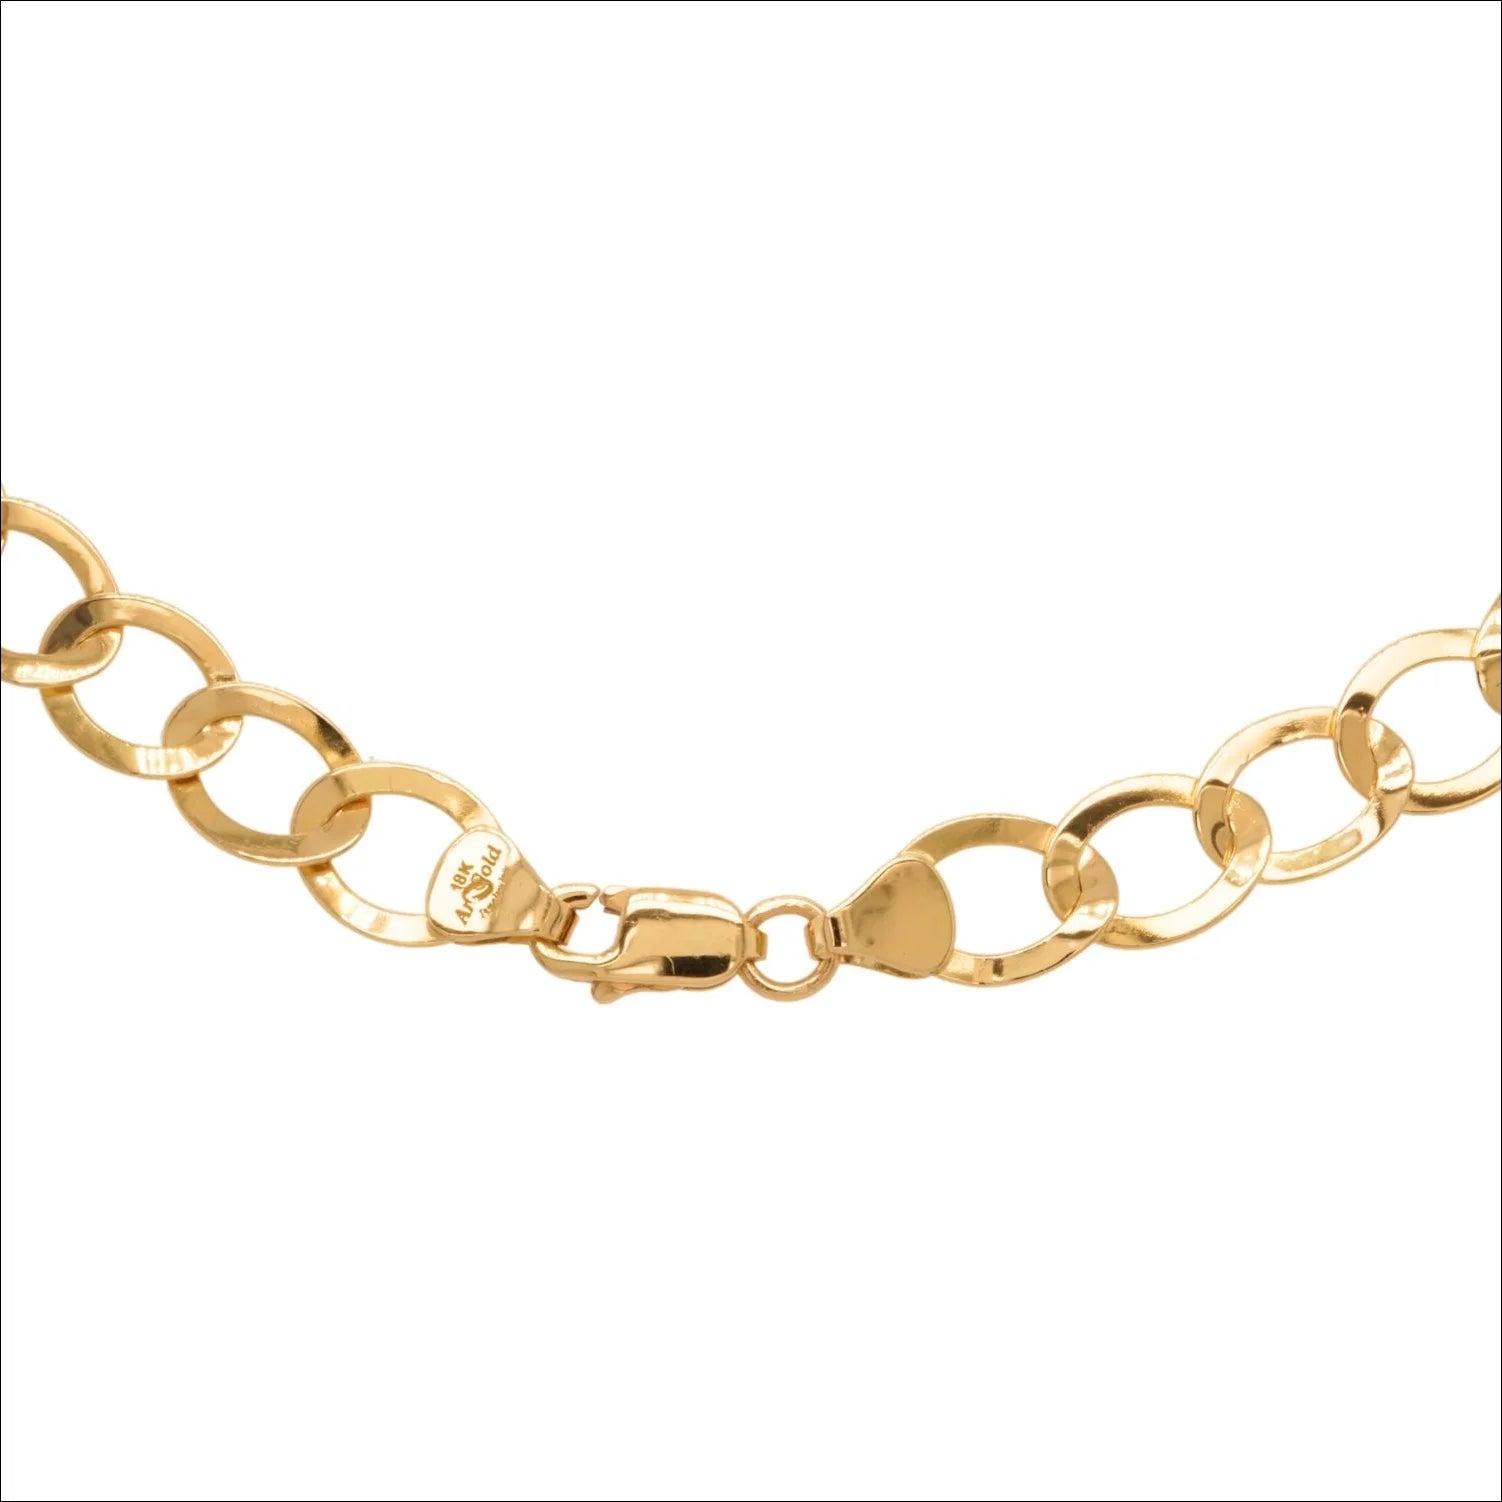 18k gold link chain - classic style | Chains